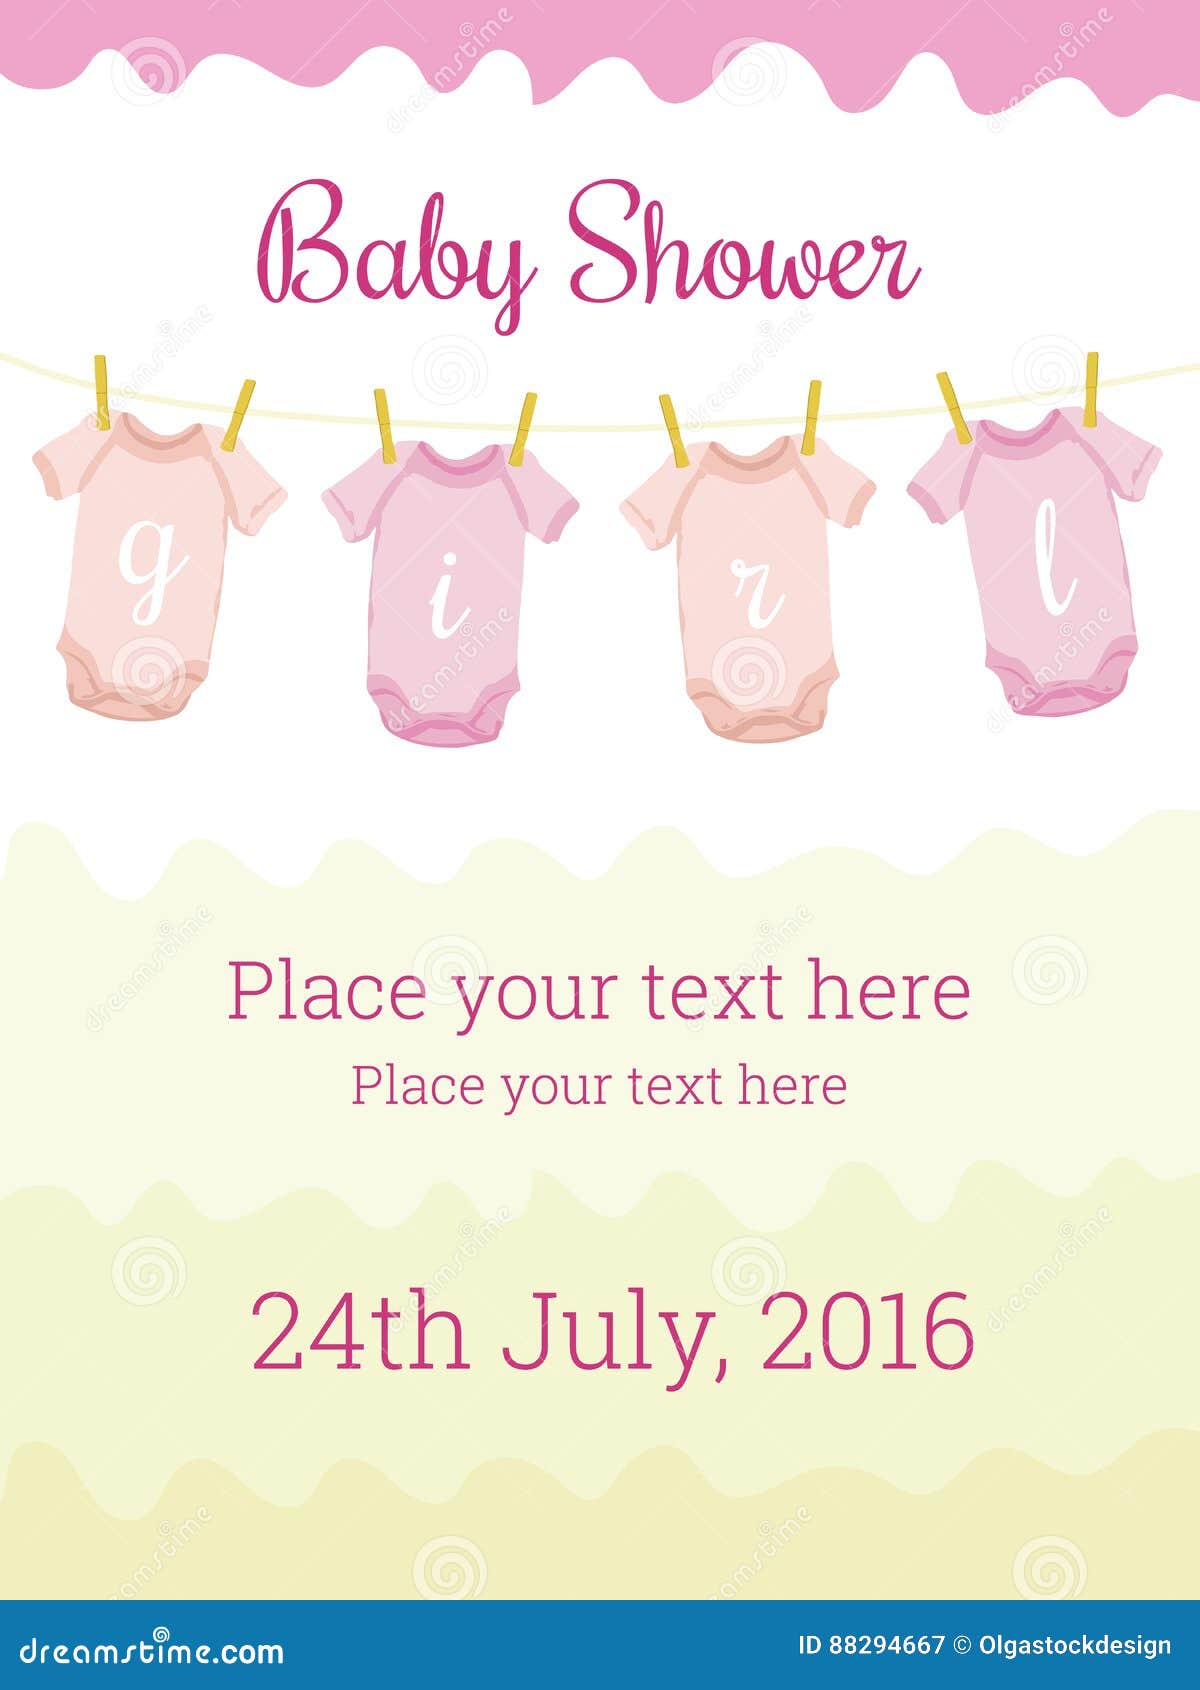 Baby Shower Invitation Card Template for Baby Girl Stock Vector Within Baby Shower Flyer Templates Free